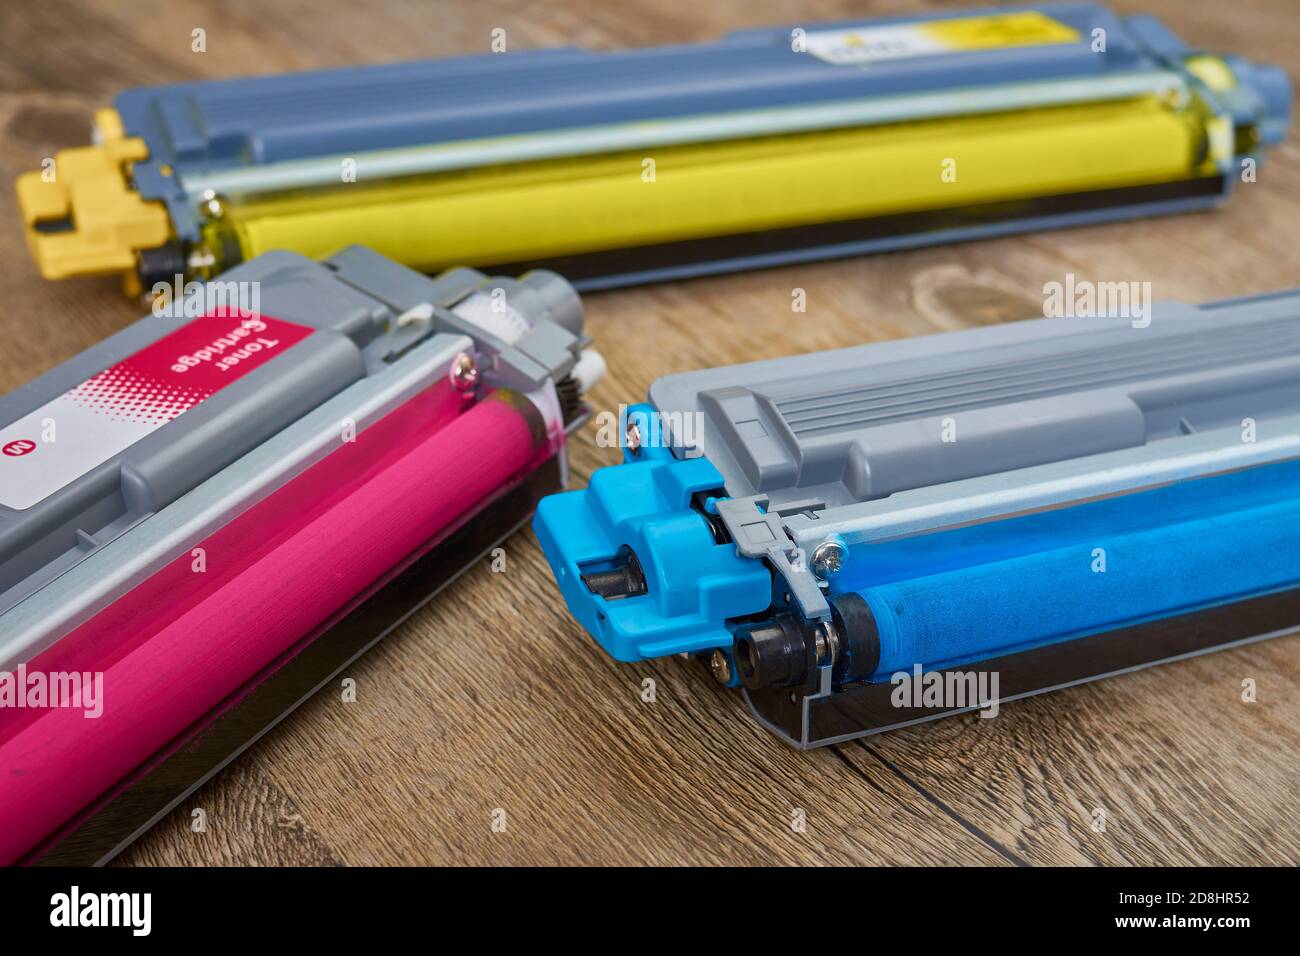 Three toner cartridges for color laser printer stacked on wooden table Stock Photo